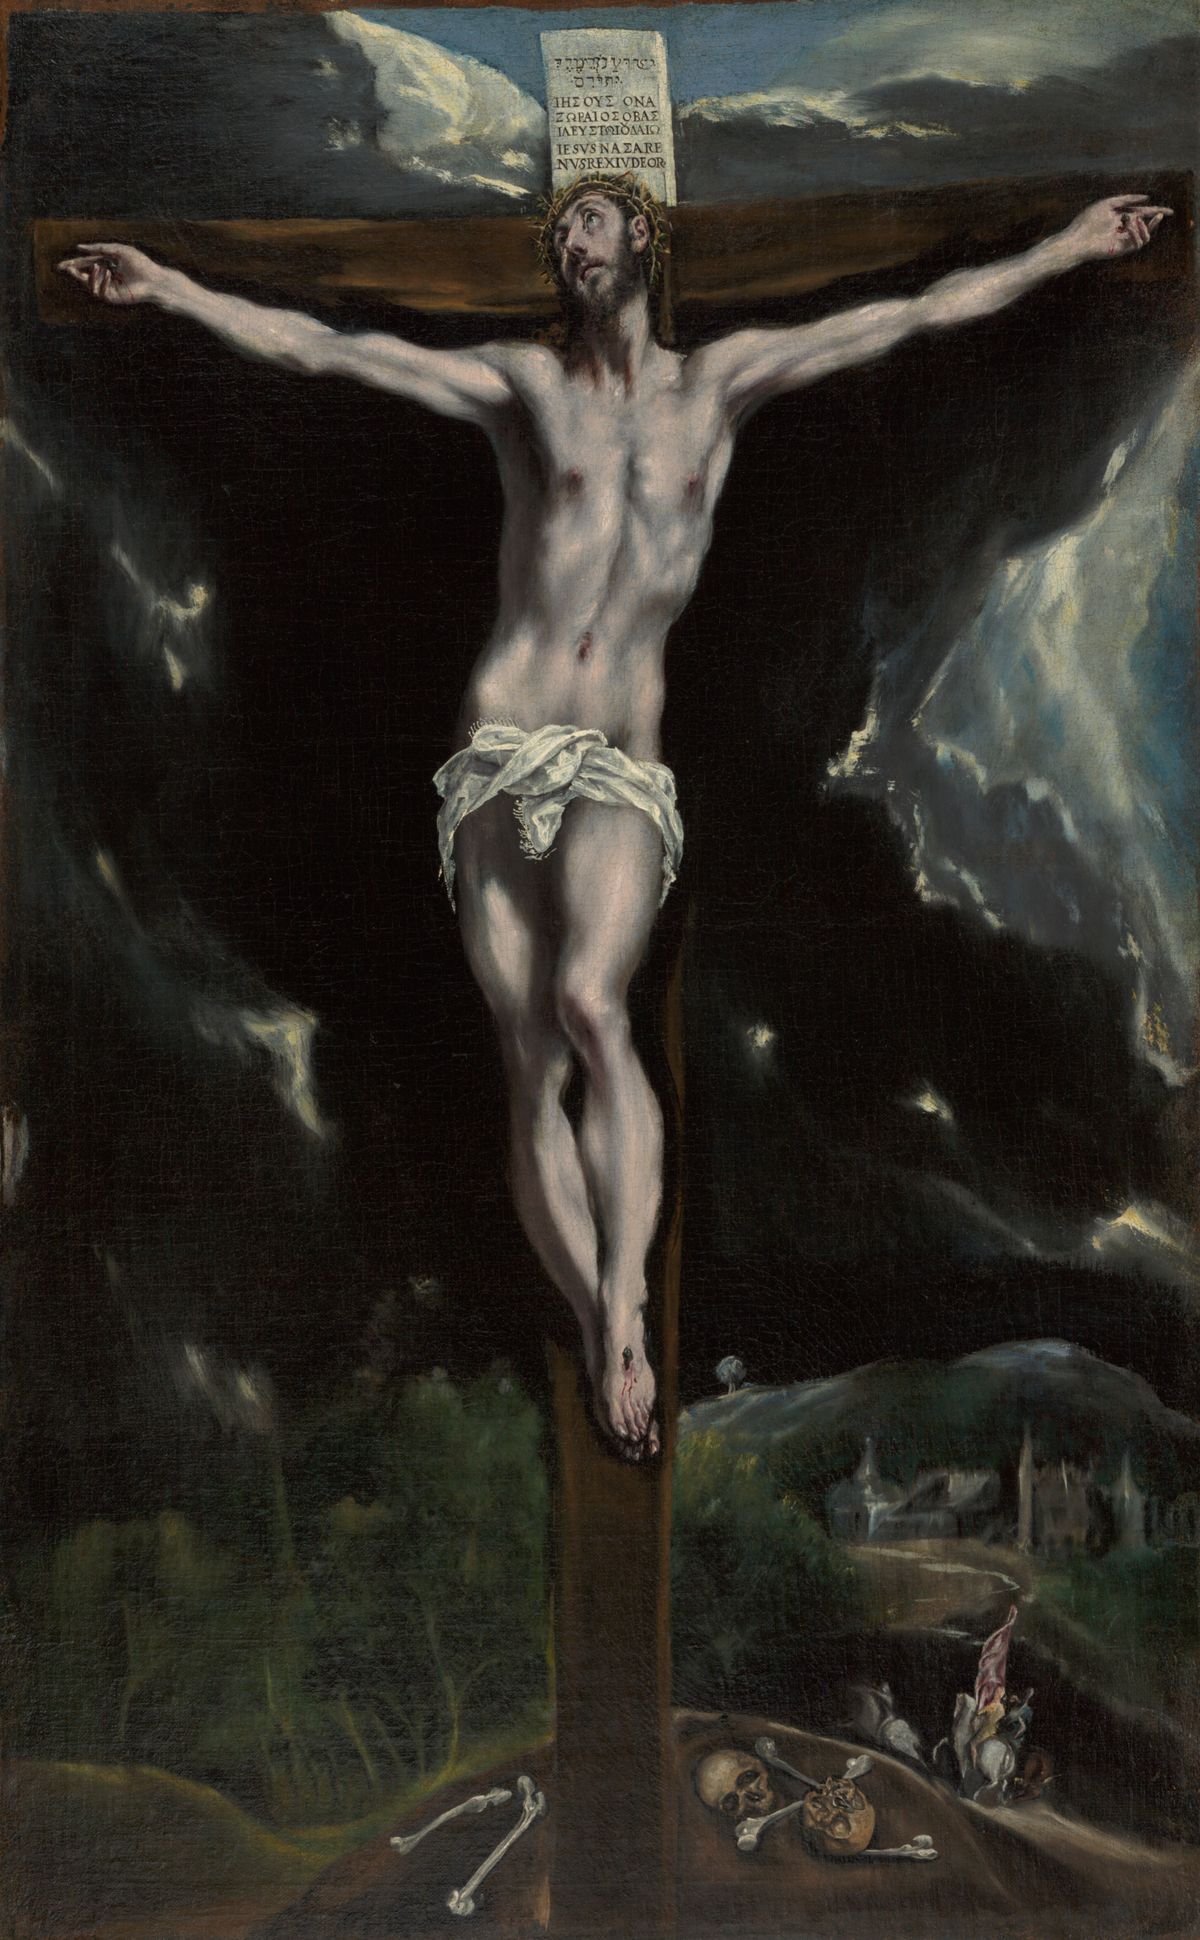 Christ on the Cross by El Greco (1600-1610) - Public Domain Bible Painting